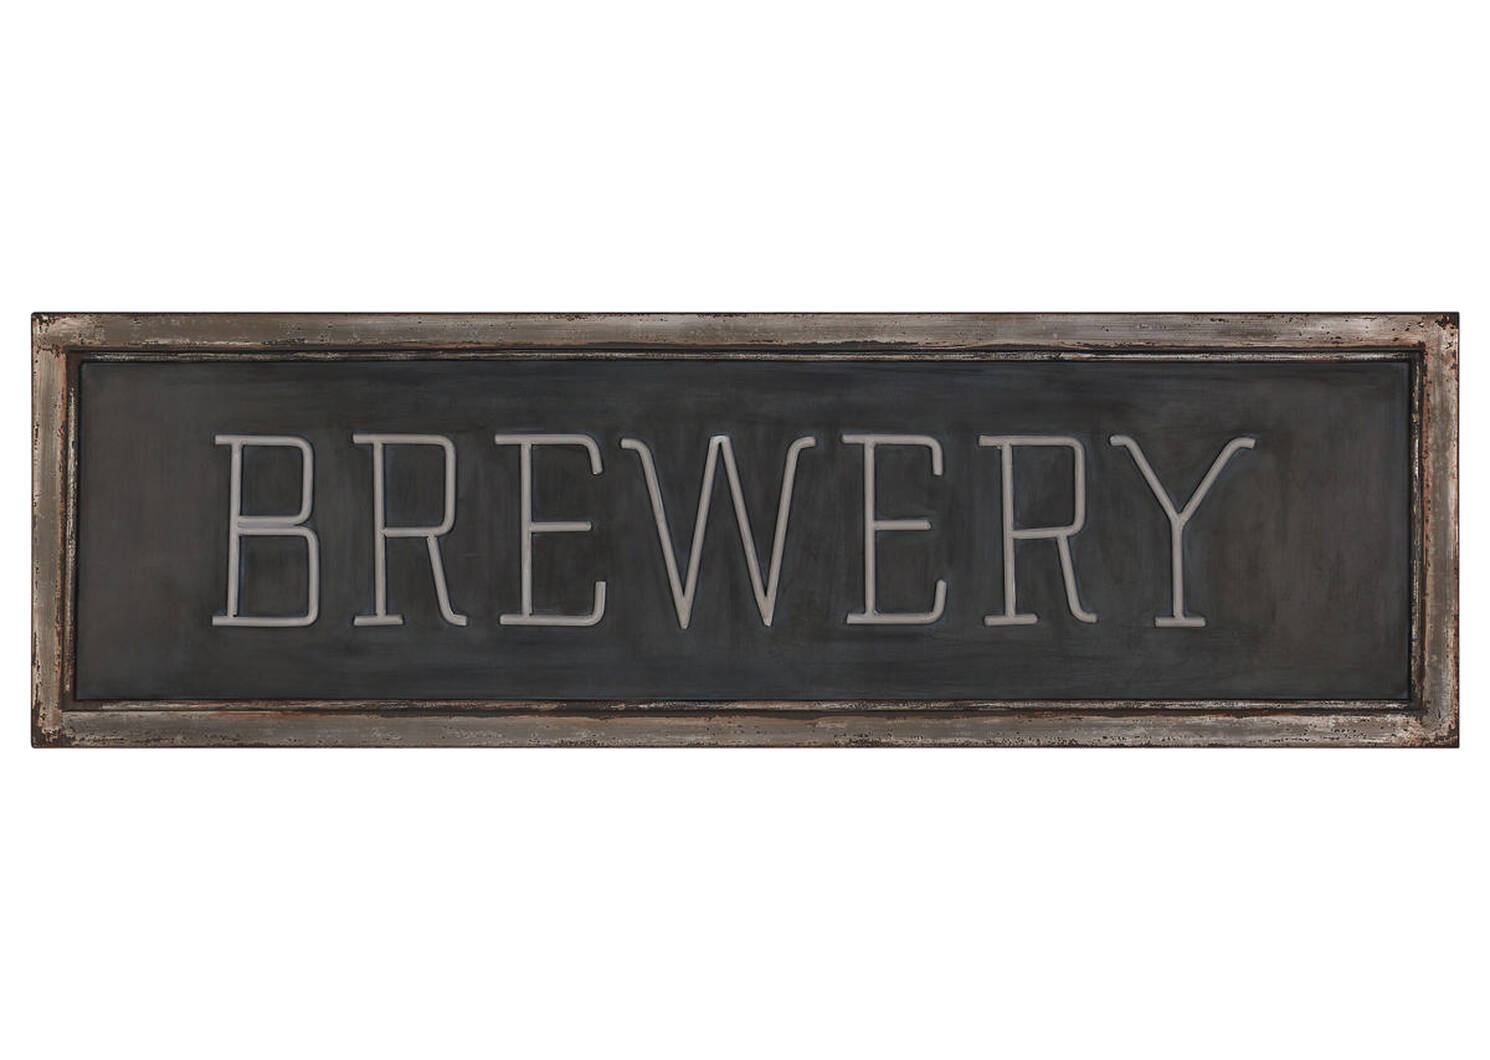 Brewery Wall Plaque